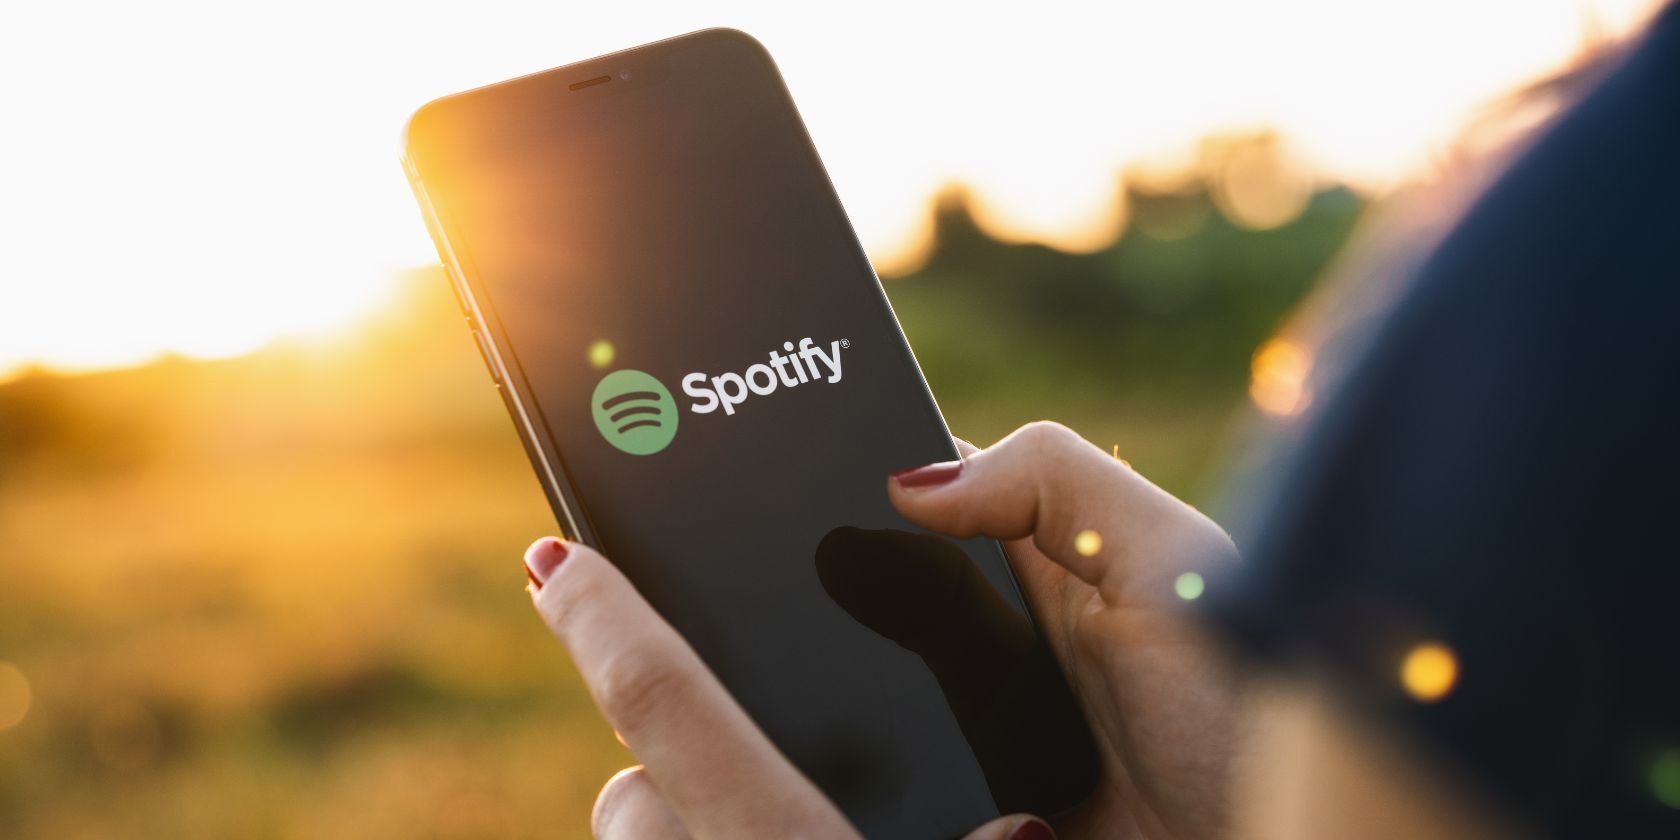 spotify logo on a smartphone with sunset in background